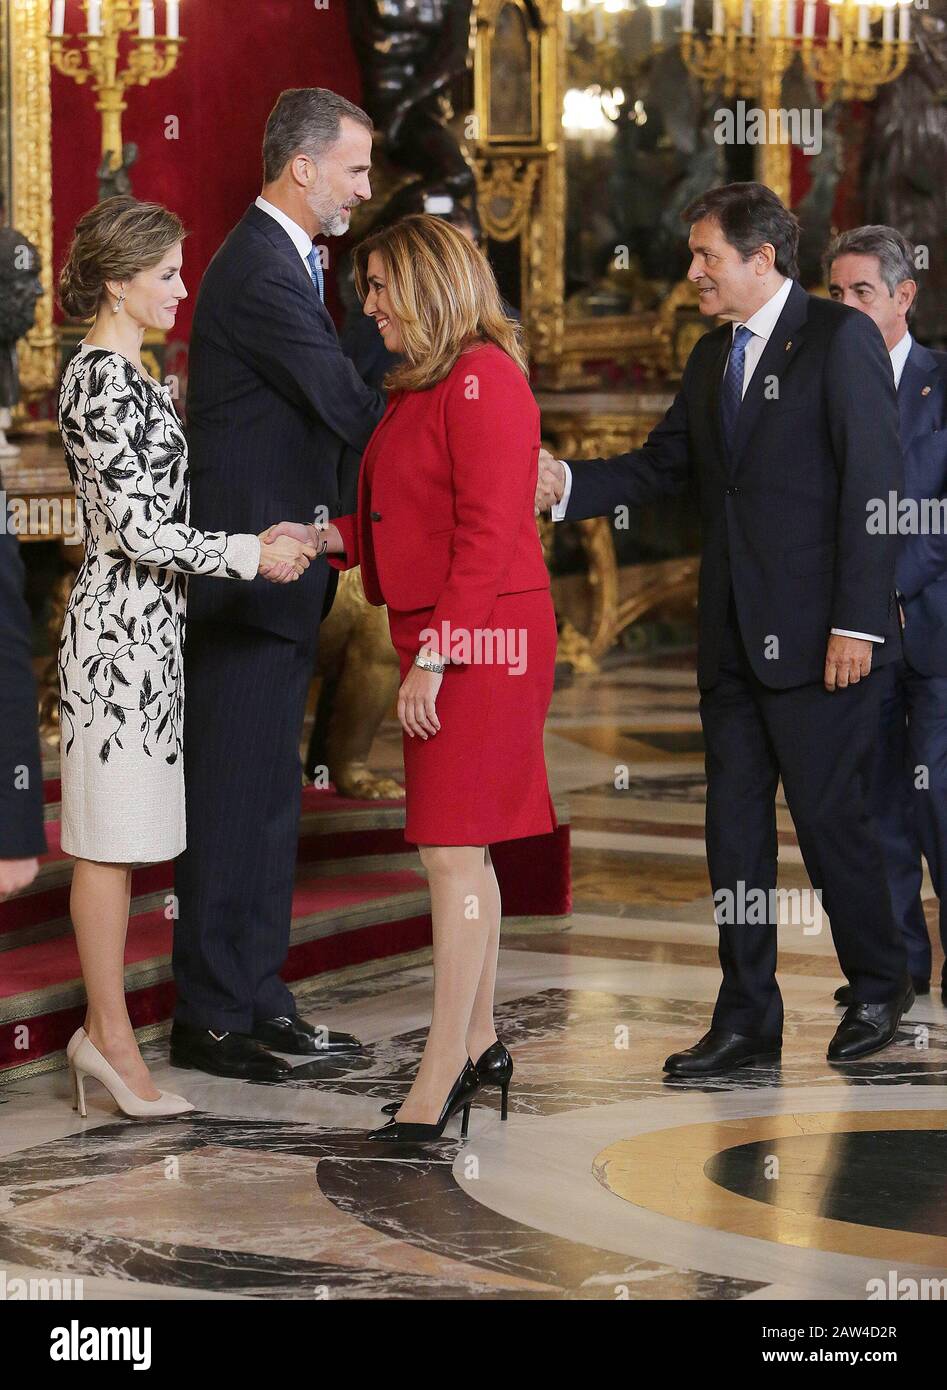 King Felipe VI of Spain, Queen Letizia of Spain and Susana Diaz Secretary General of the Andalusian Federation of Spanish Socialist Workers' Party and Stock Photo